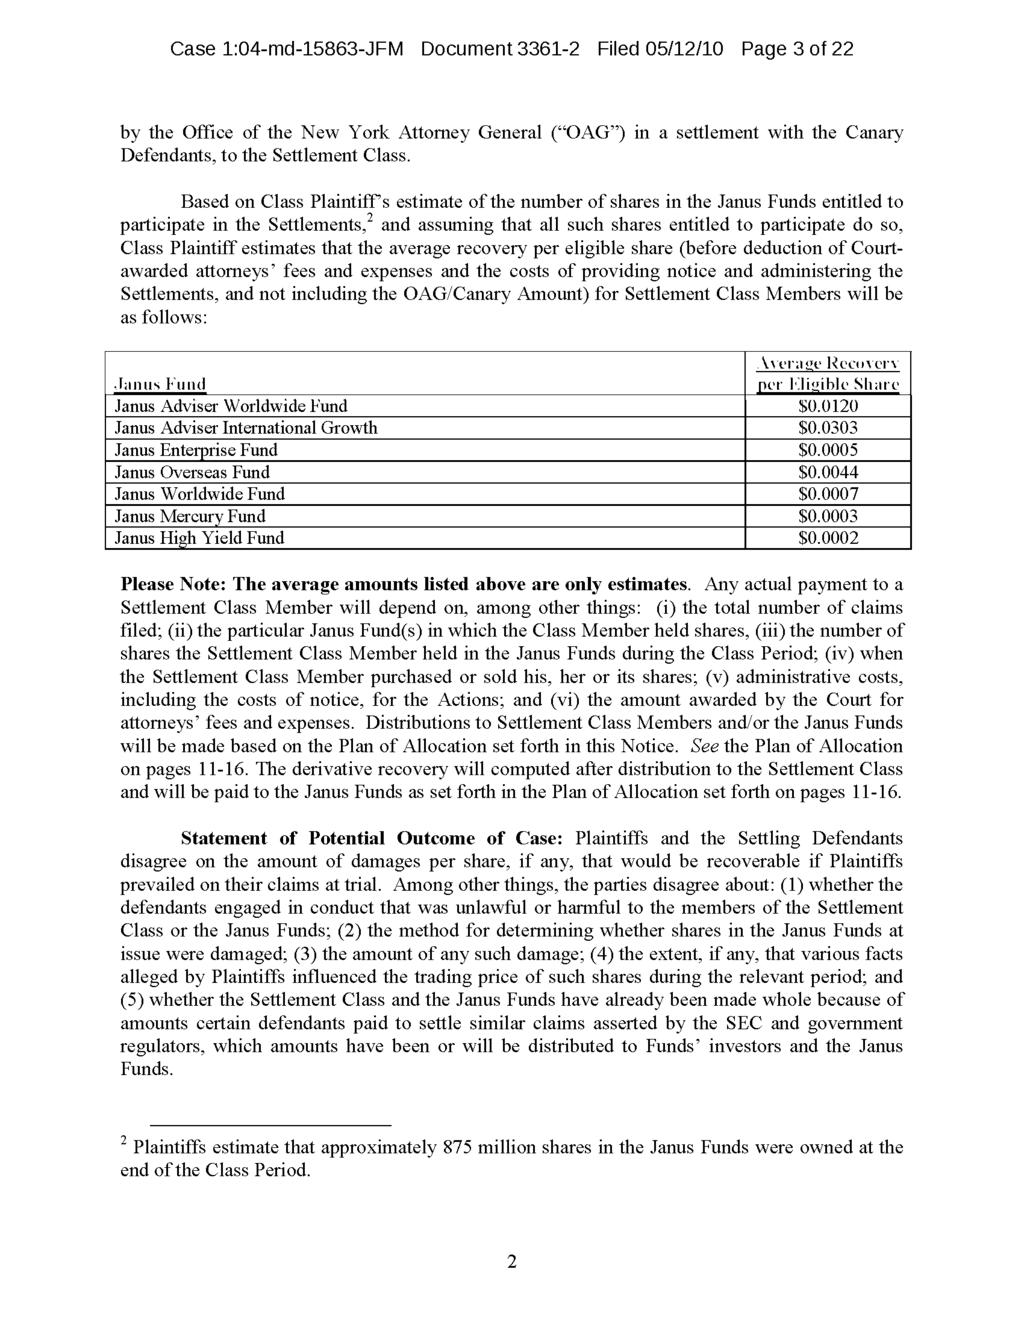 Case 1:04-md-15863-JFM Document 3361-2 Filed 05/12/10 Page 3 of 22 by the Office of the New York Attorney General ("OAG") in a settlement with the Canary Defendants, to the Settlement Class.